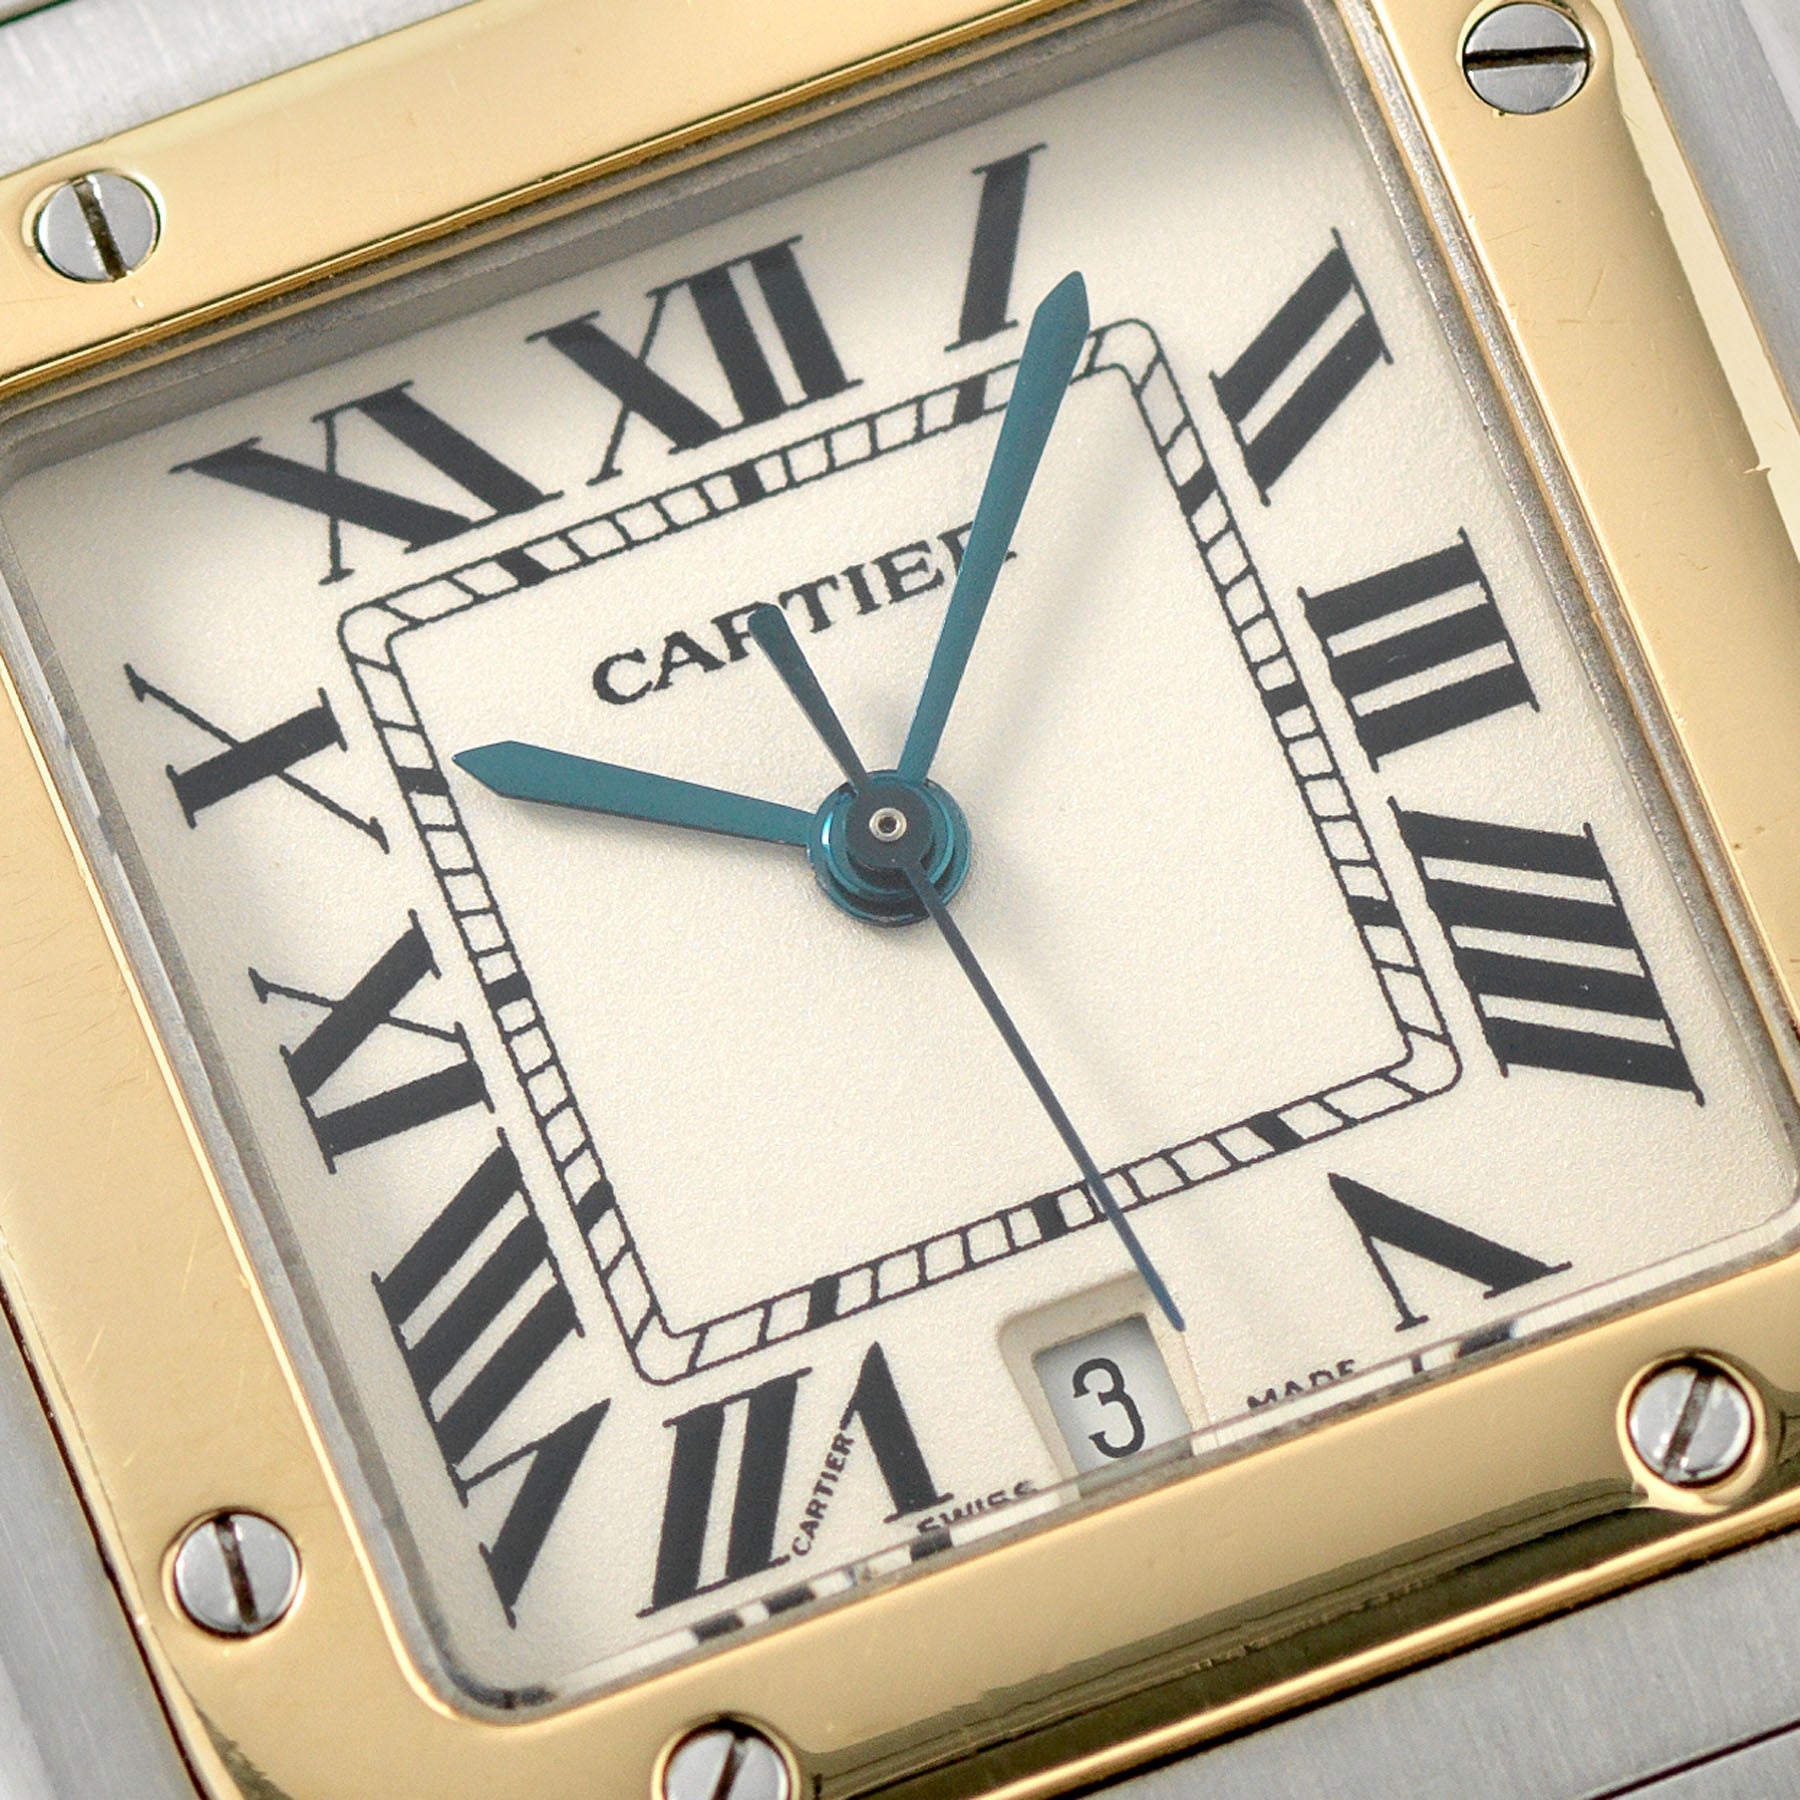 Cartier Santos Galbee Steel and Gold Reference 187901